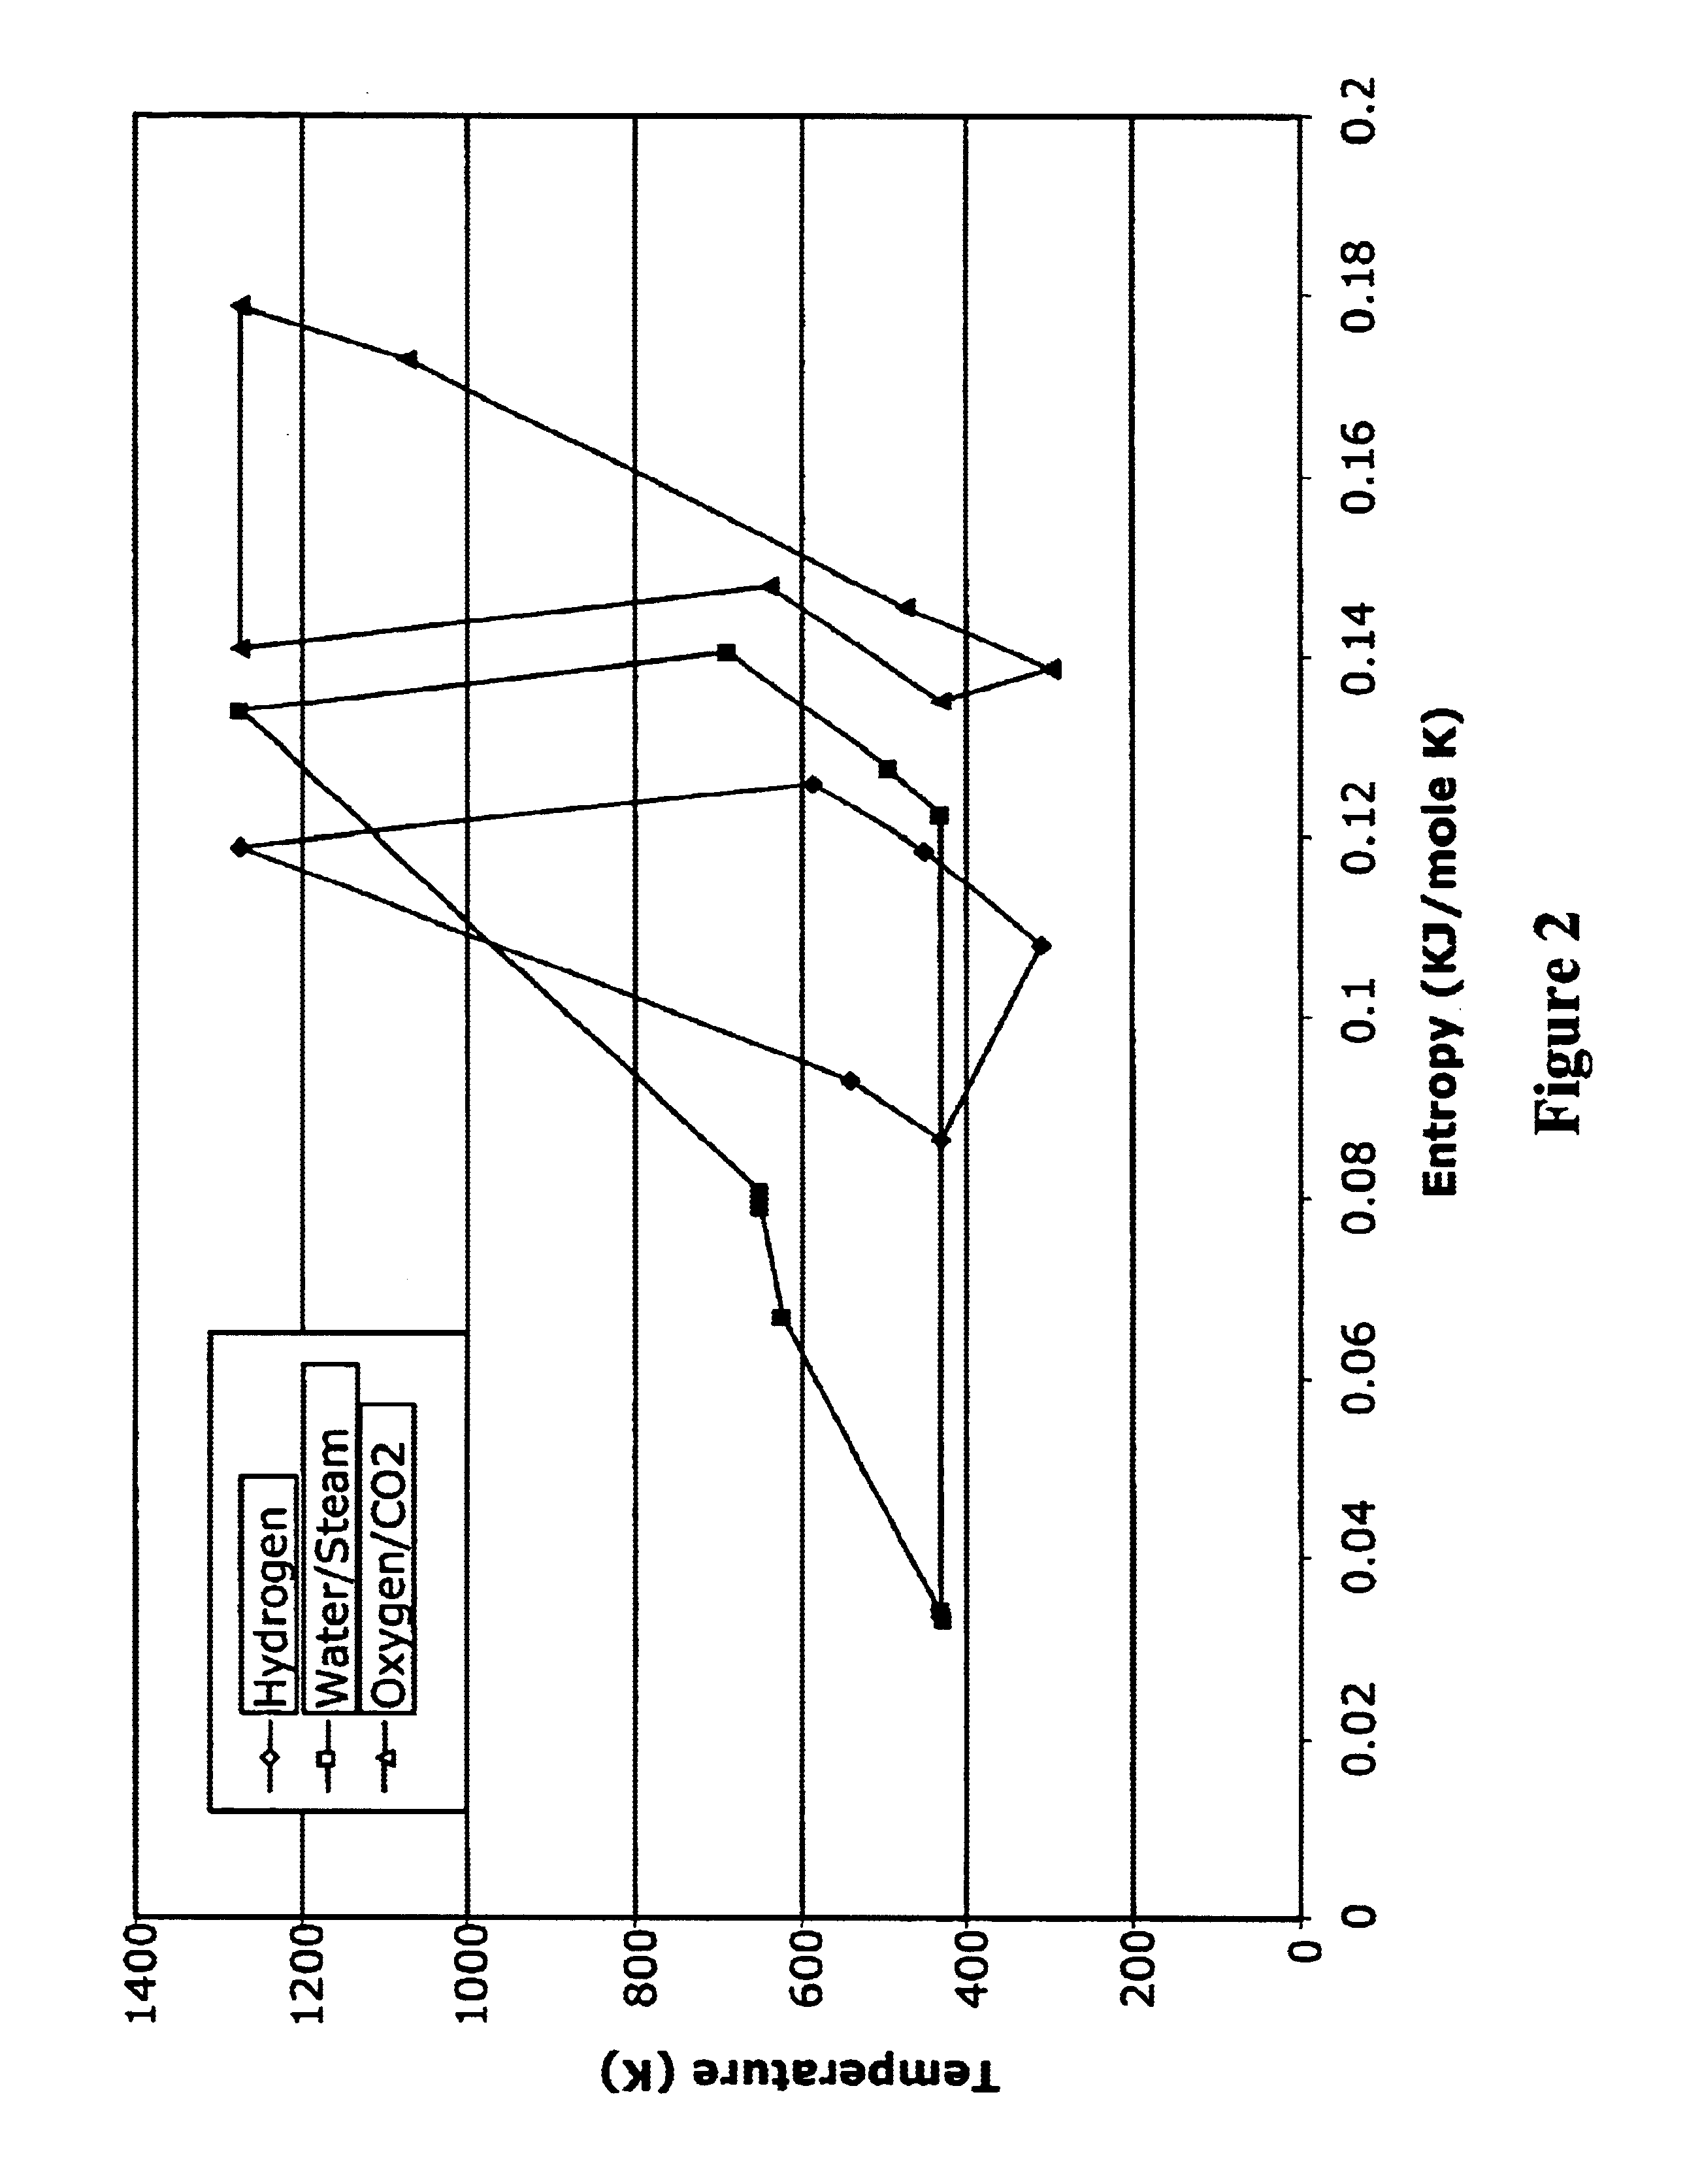 Combusting hydrocarbons excluding nitrogen using mixed conductor and metal hydride compressor